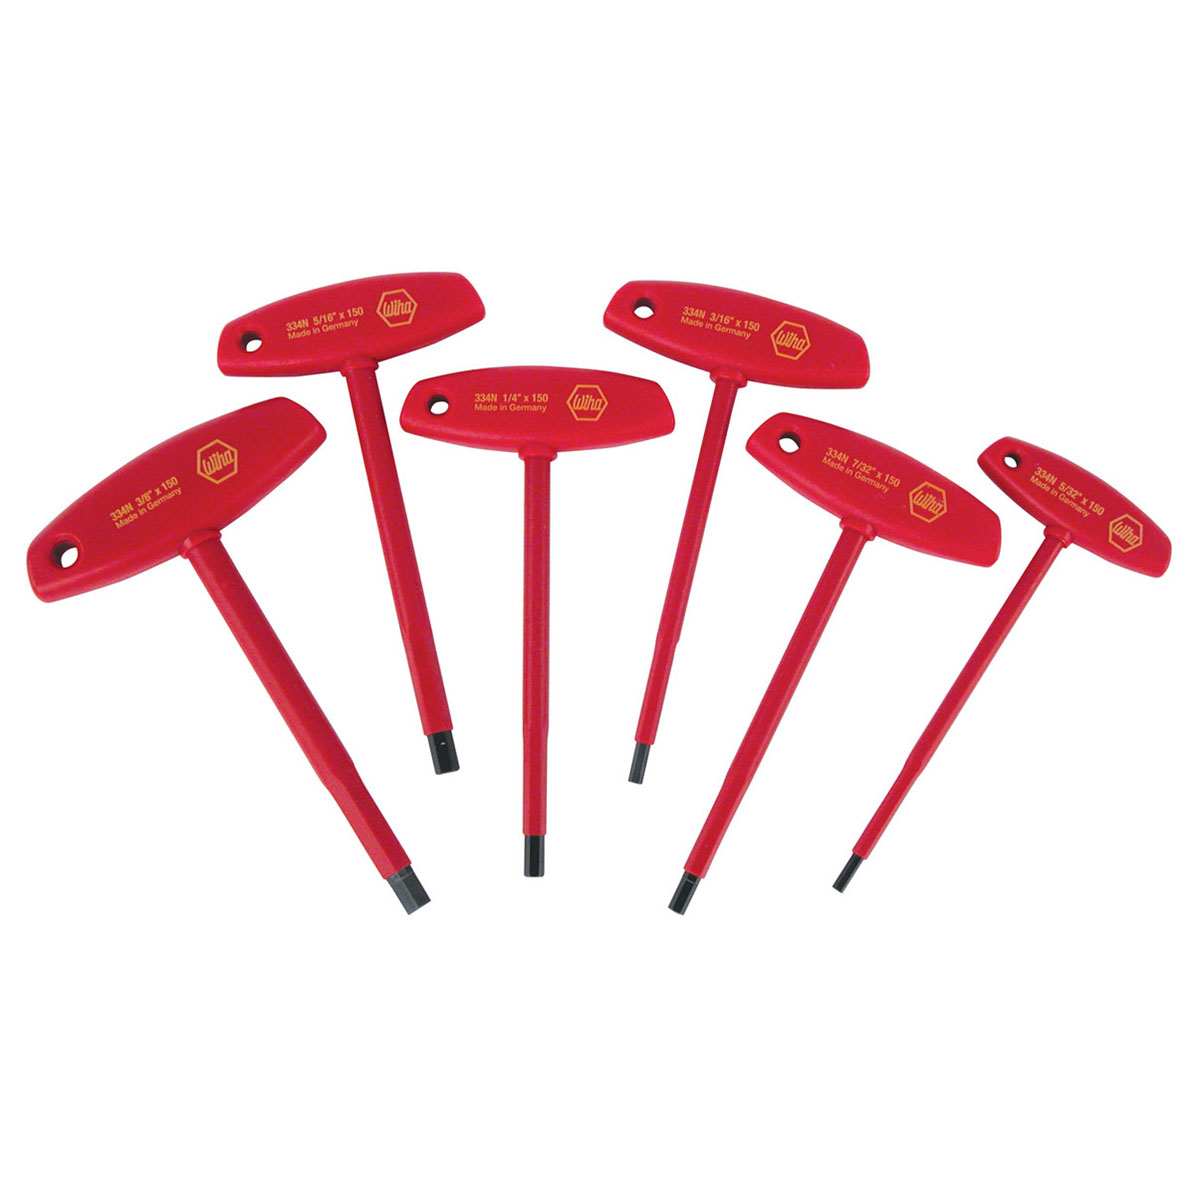 6 PIECE INSULATED THANDLE HEX SCREWDRIVER SET  INCH